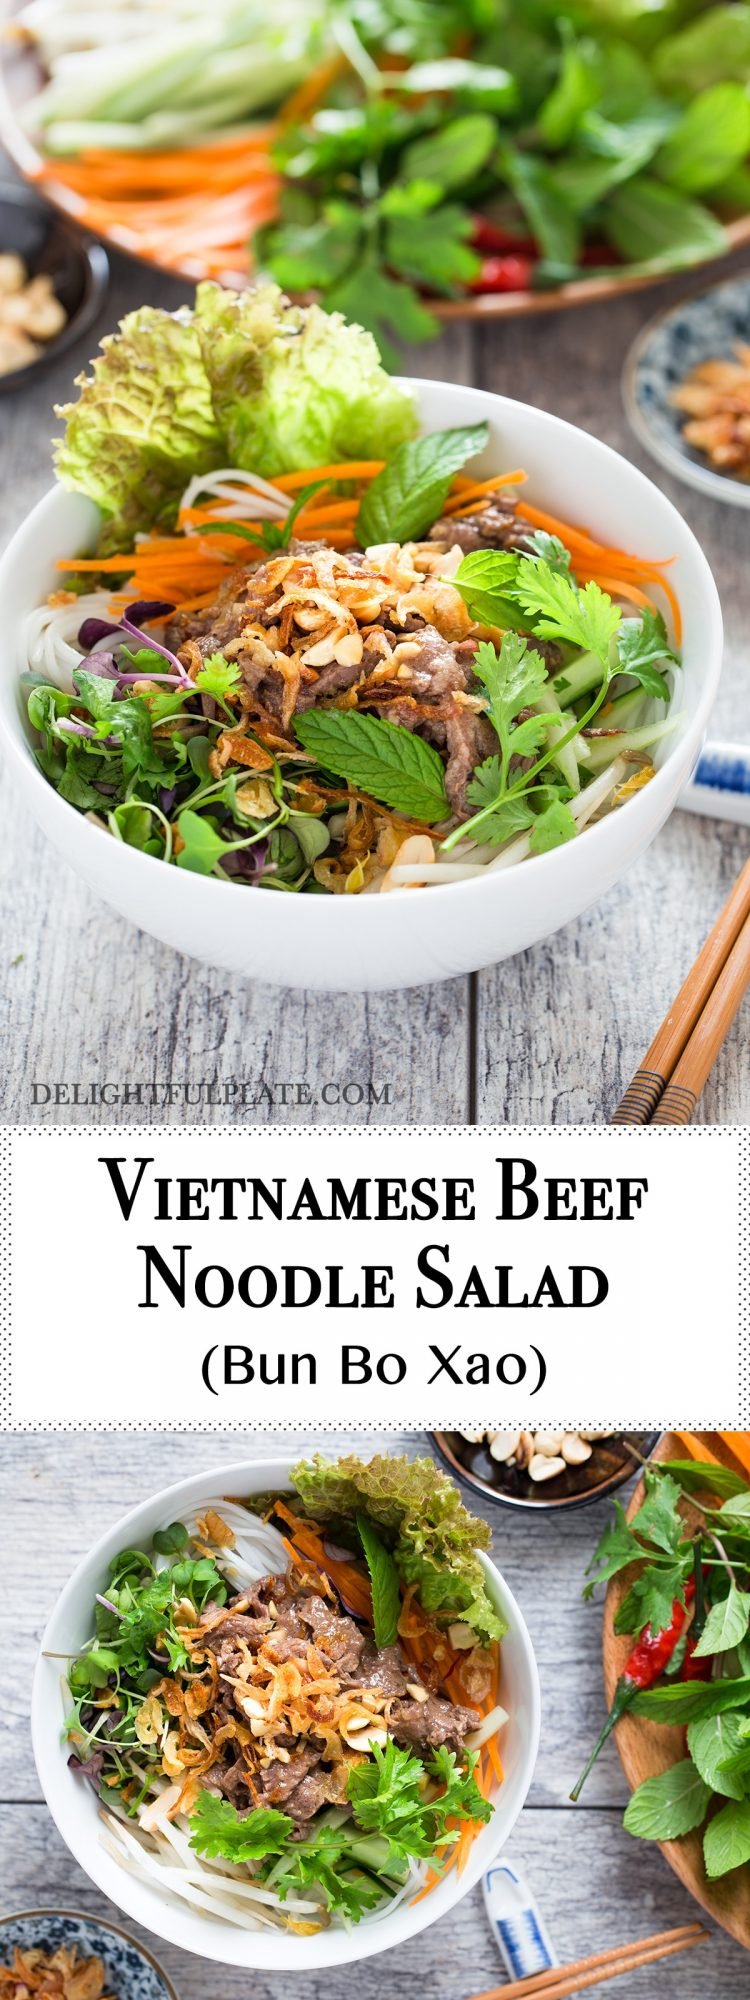 Vietnamese beef noodle salad is tasty with tender beef, crunchy veggies and refreshing herbs. It can be either a salad or main dish.